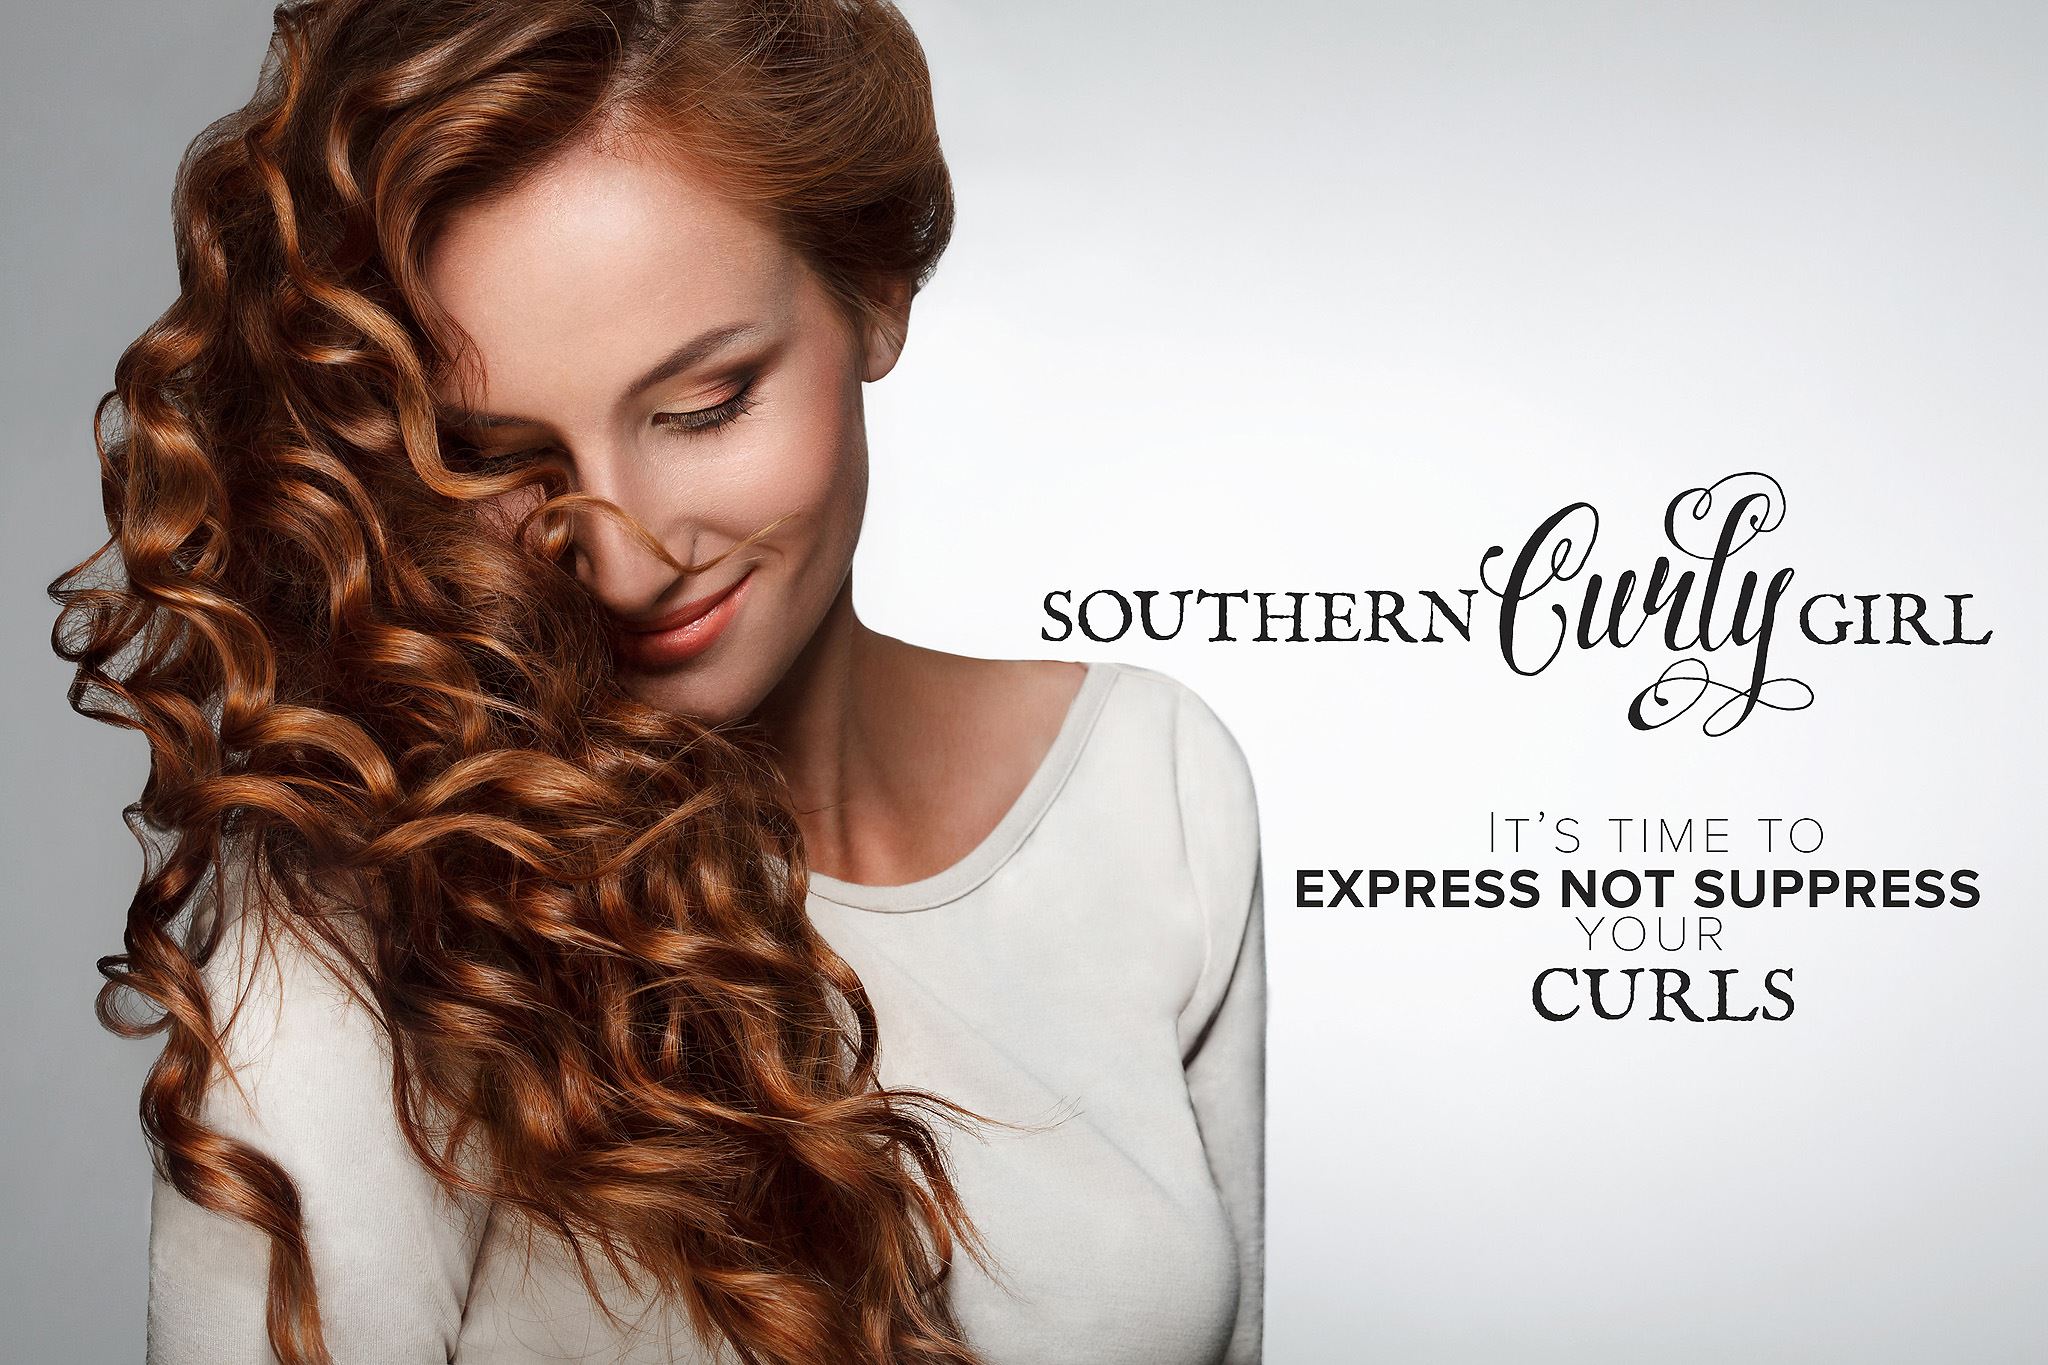 Business logo of Southern Curly Girl